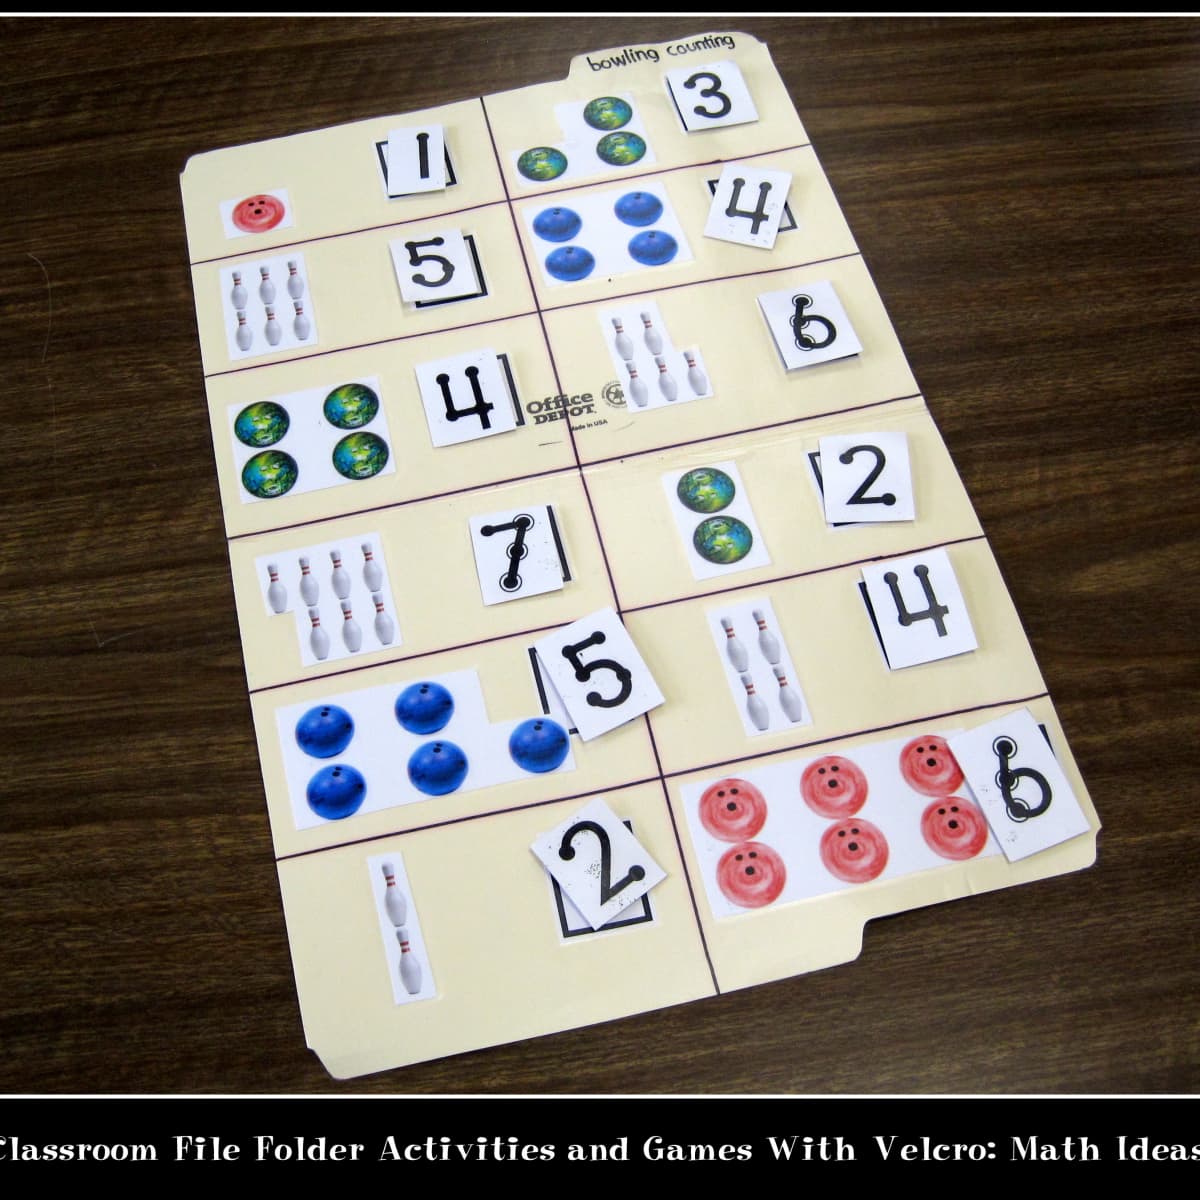 Cool Math Games Site Review - HubPages